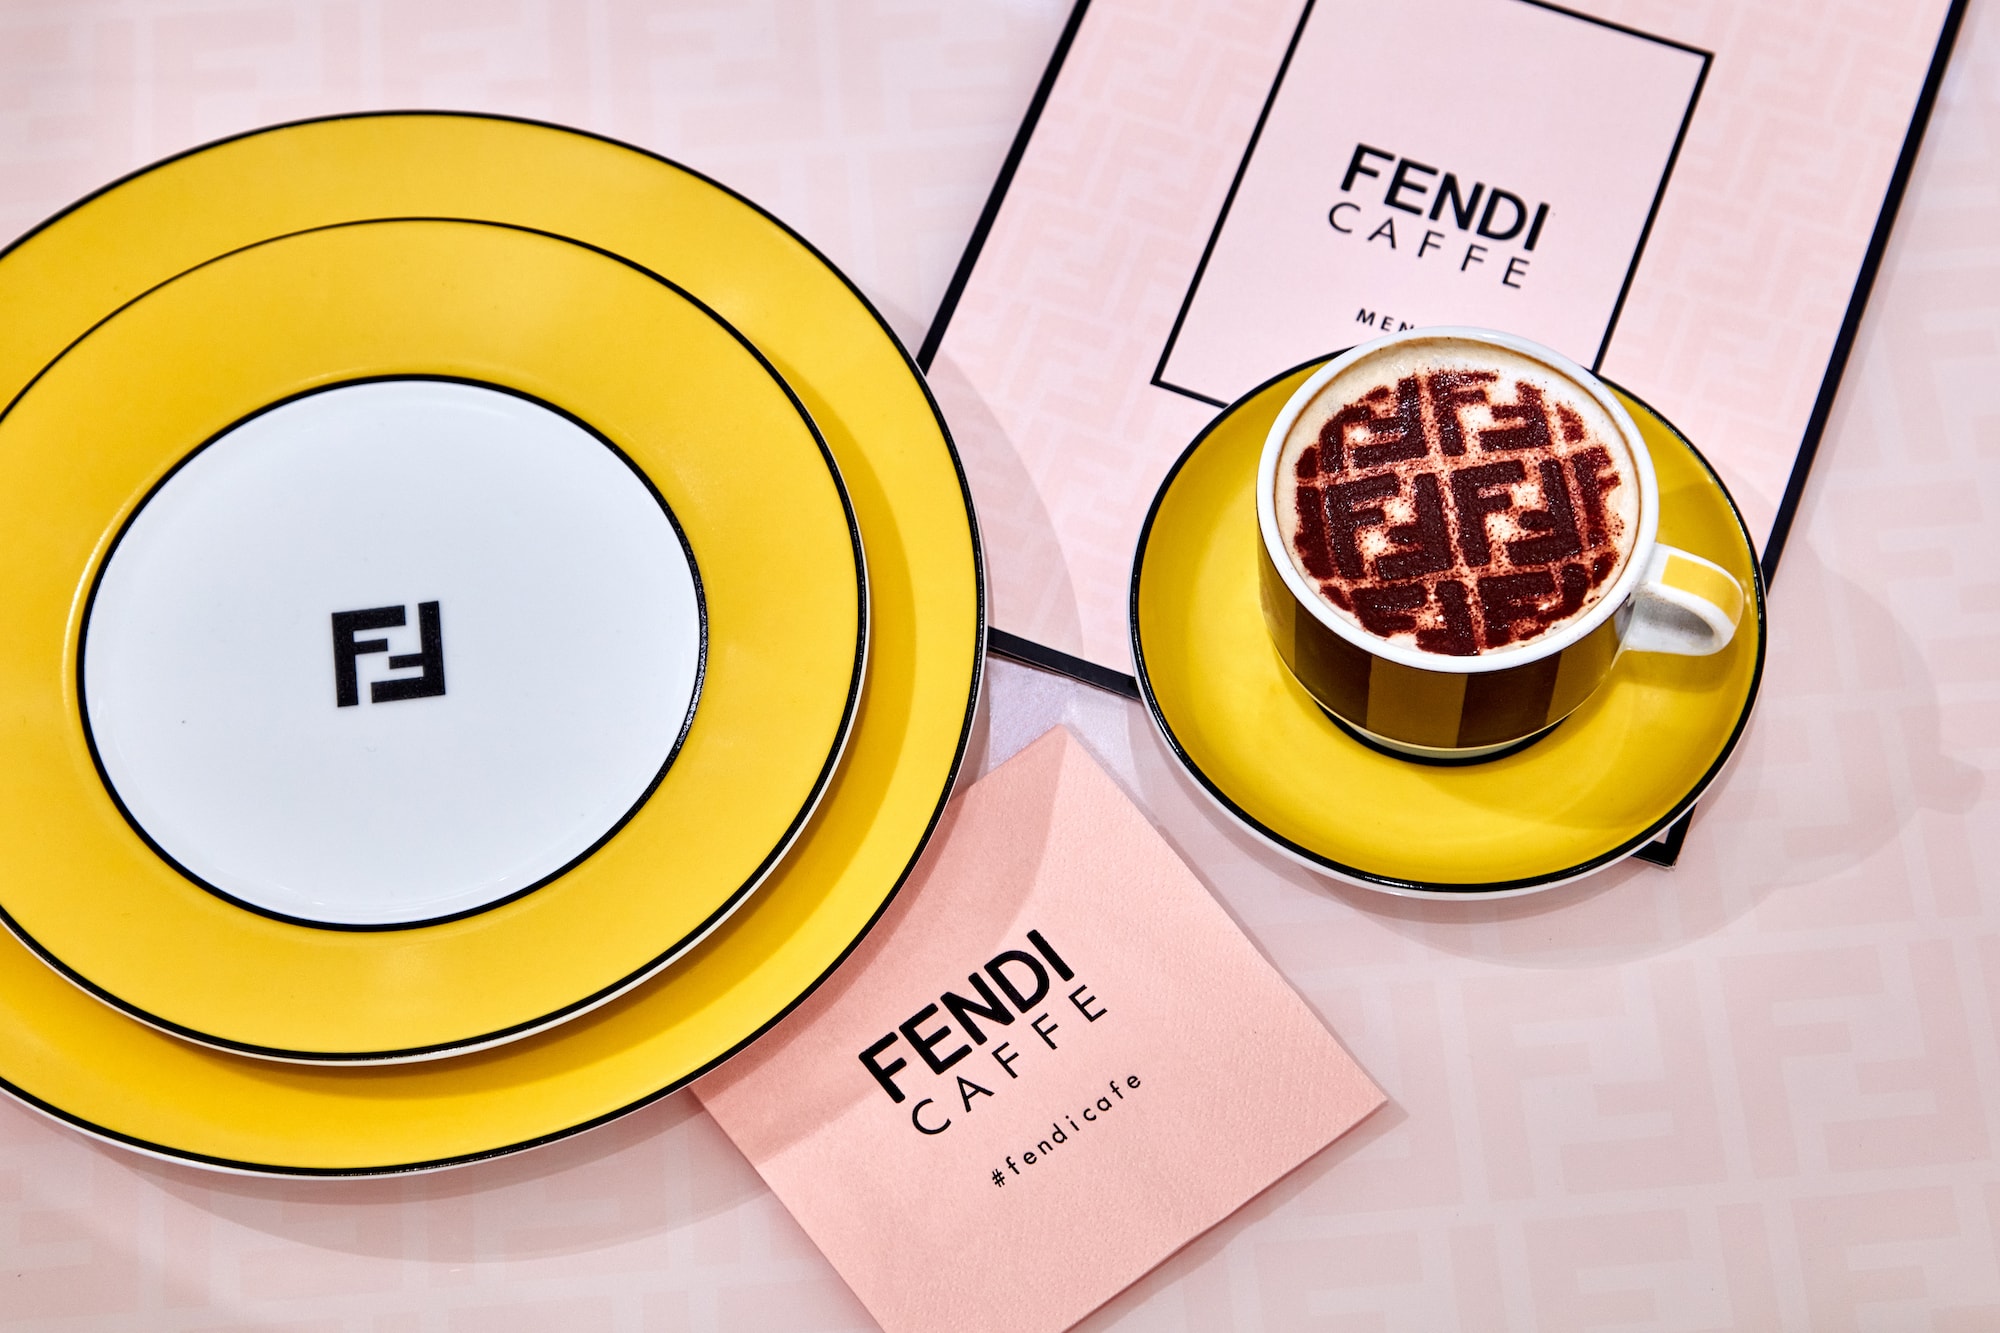 Fendi Opens FENDI CAFFE At Selfridges Holiday Theme Collection Exclusive Pop-up space coffee drinks menu logo branded instagram 